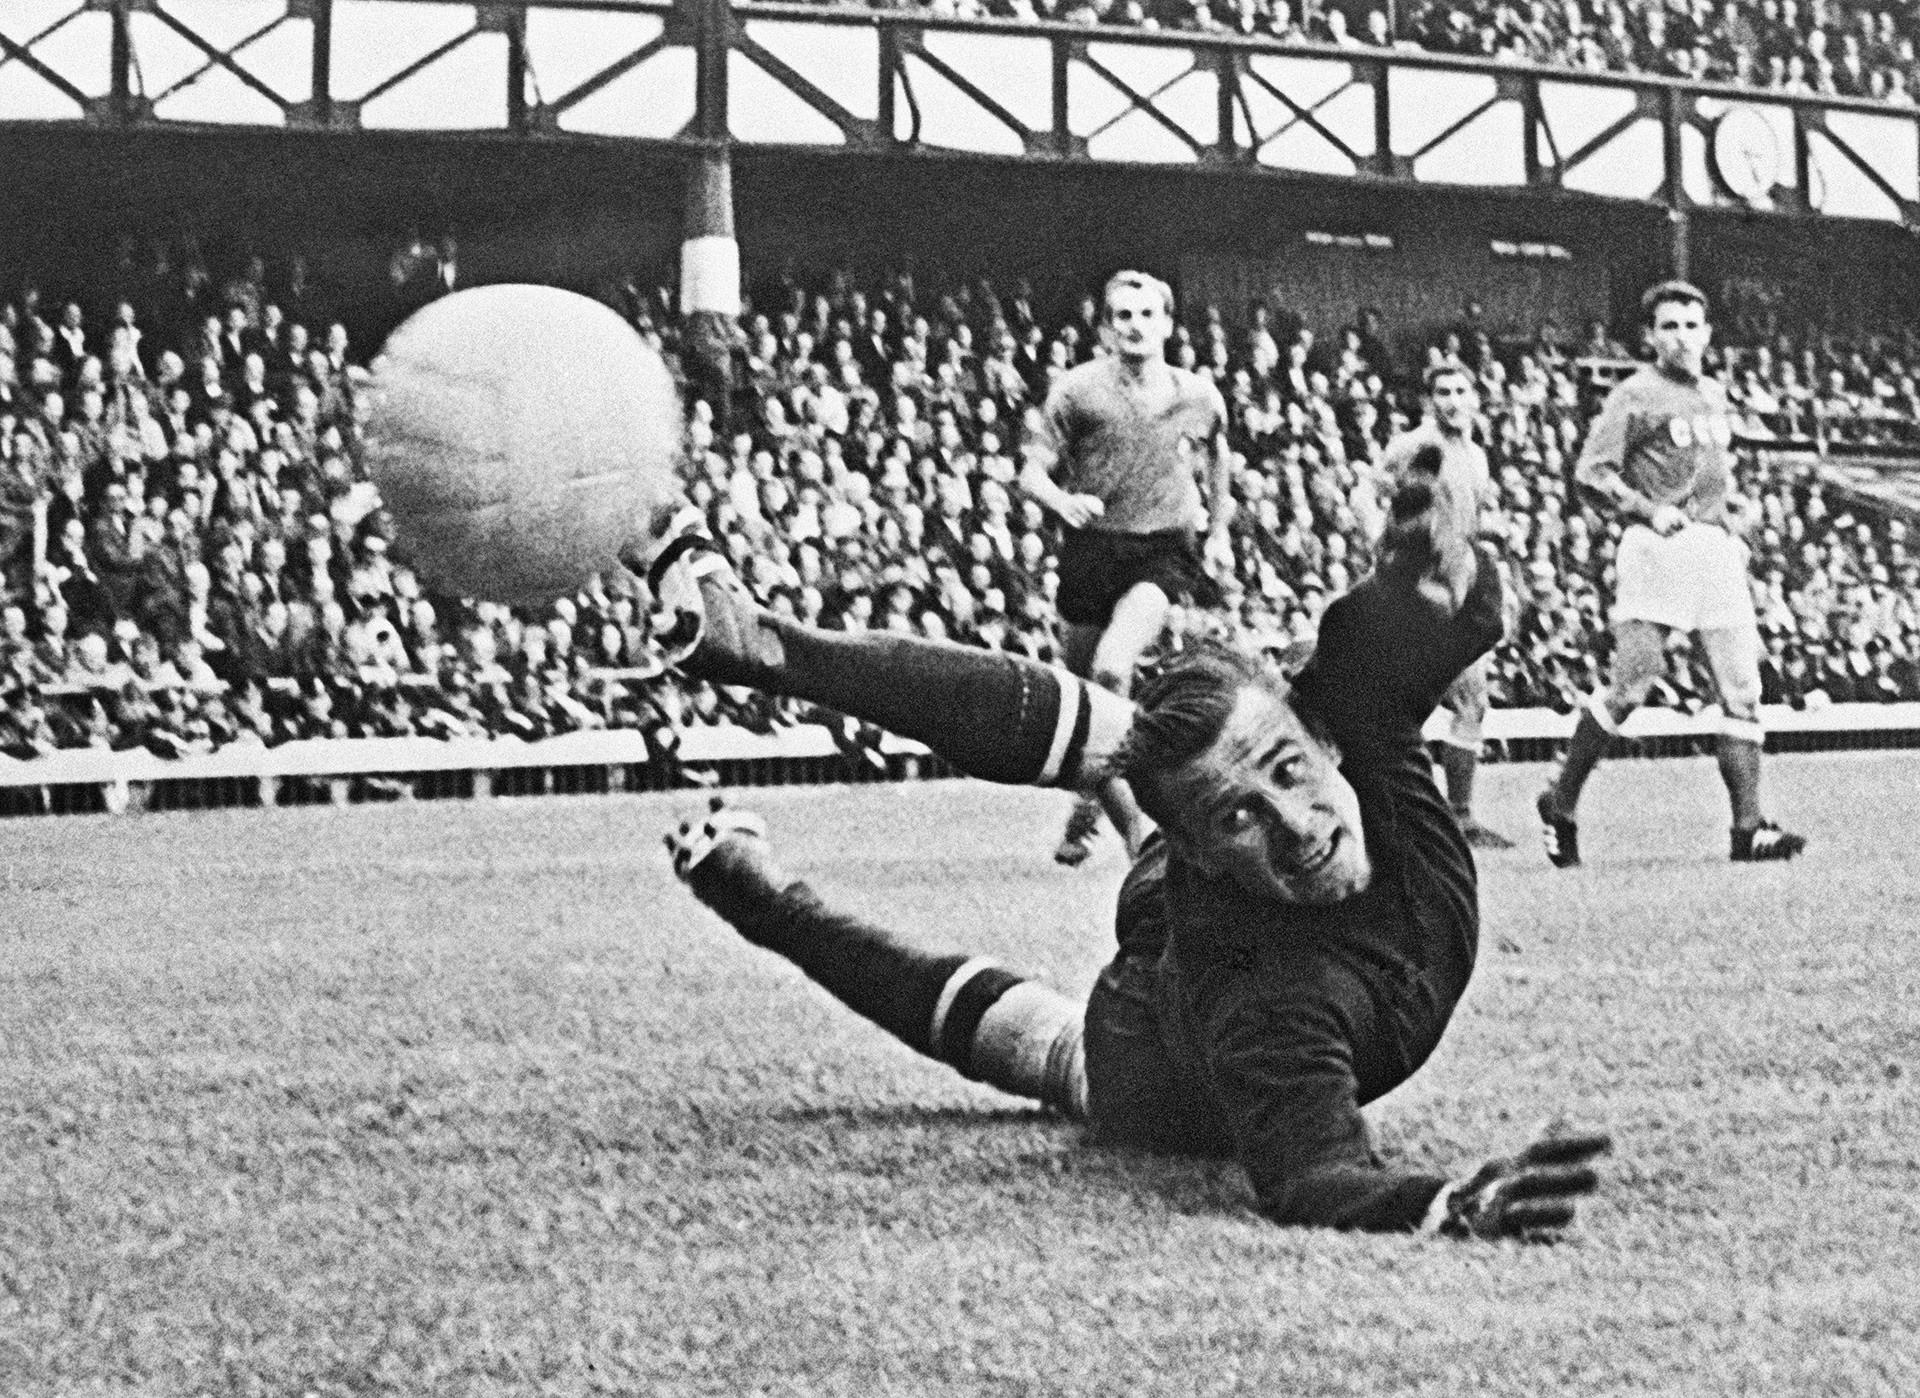 facts about Lev Yashin, the greatest football player in Russia's